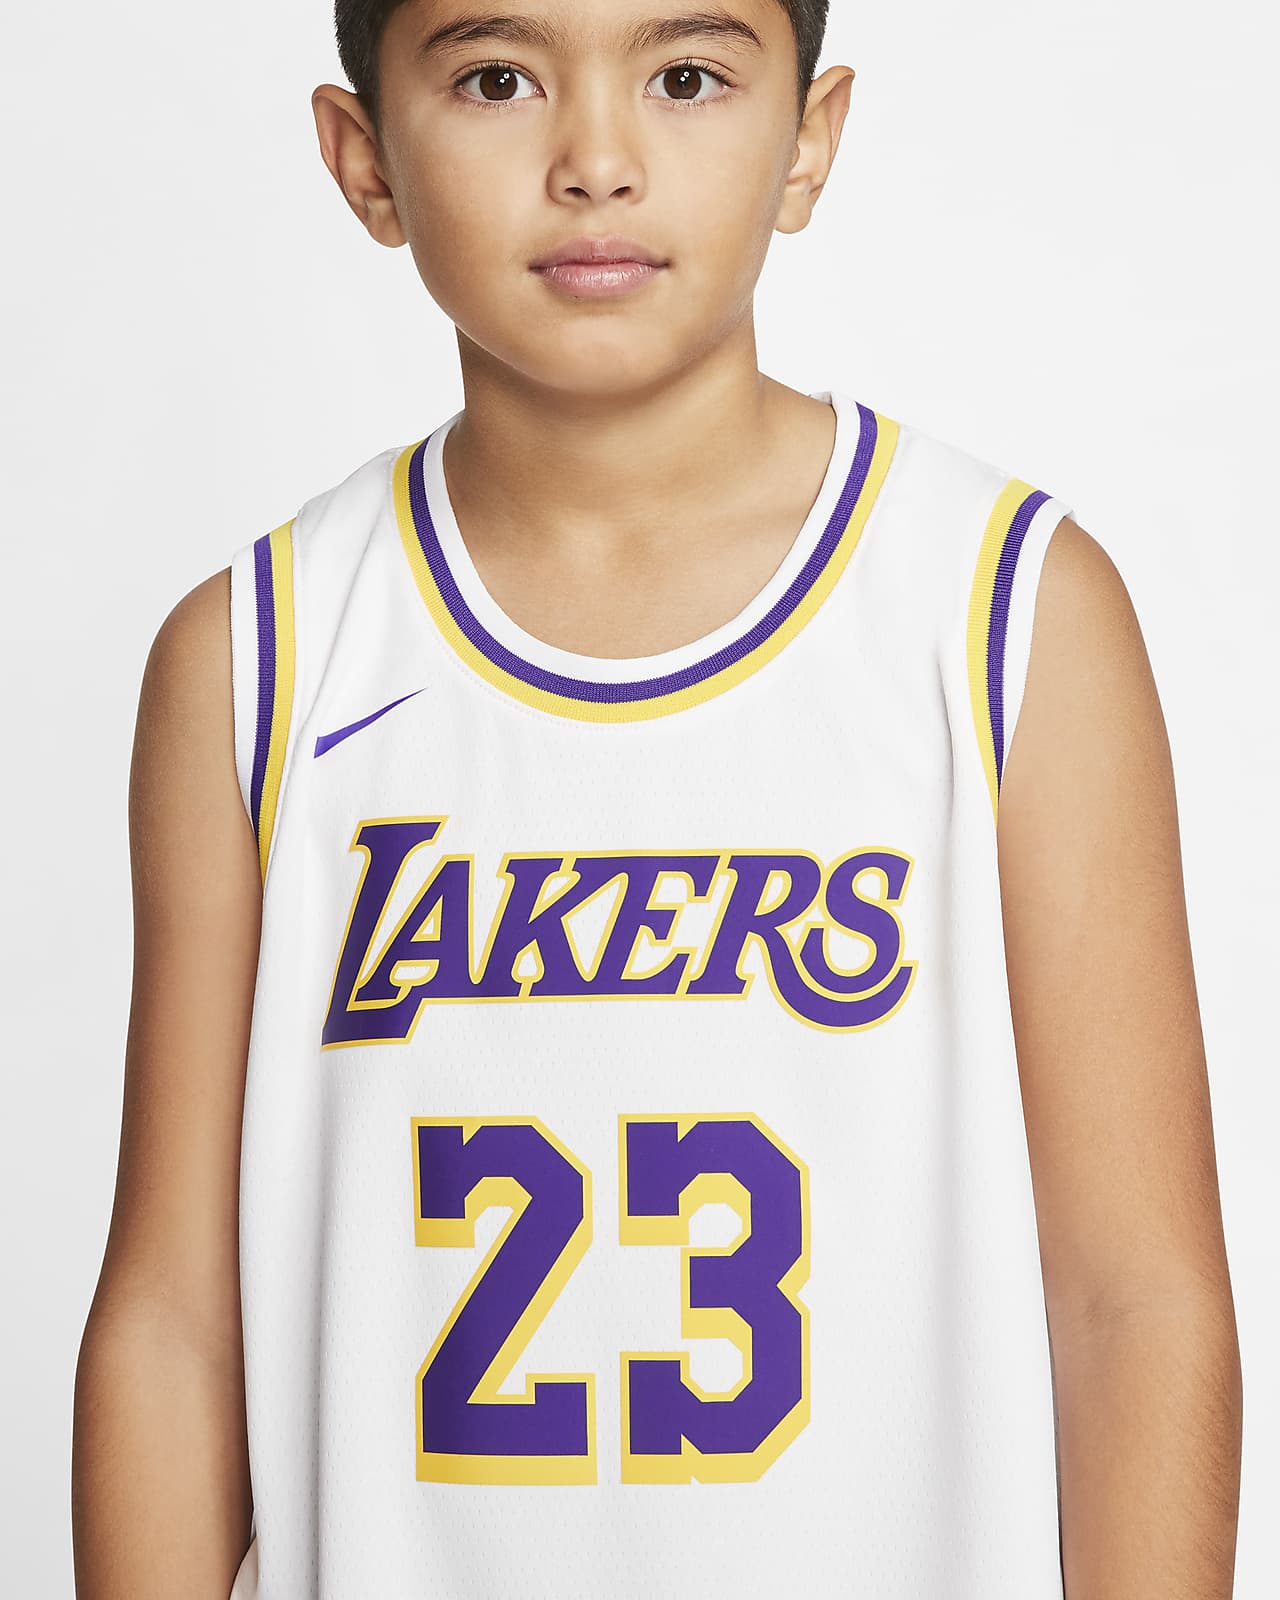 lebron james jersey lakers youth Off 55% - www.bashhguidelines.org